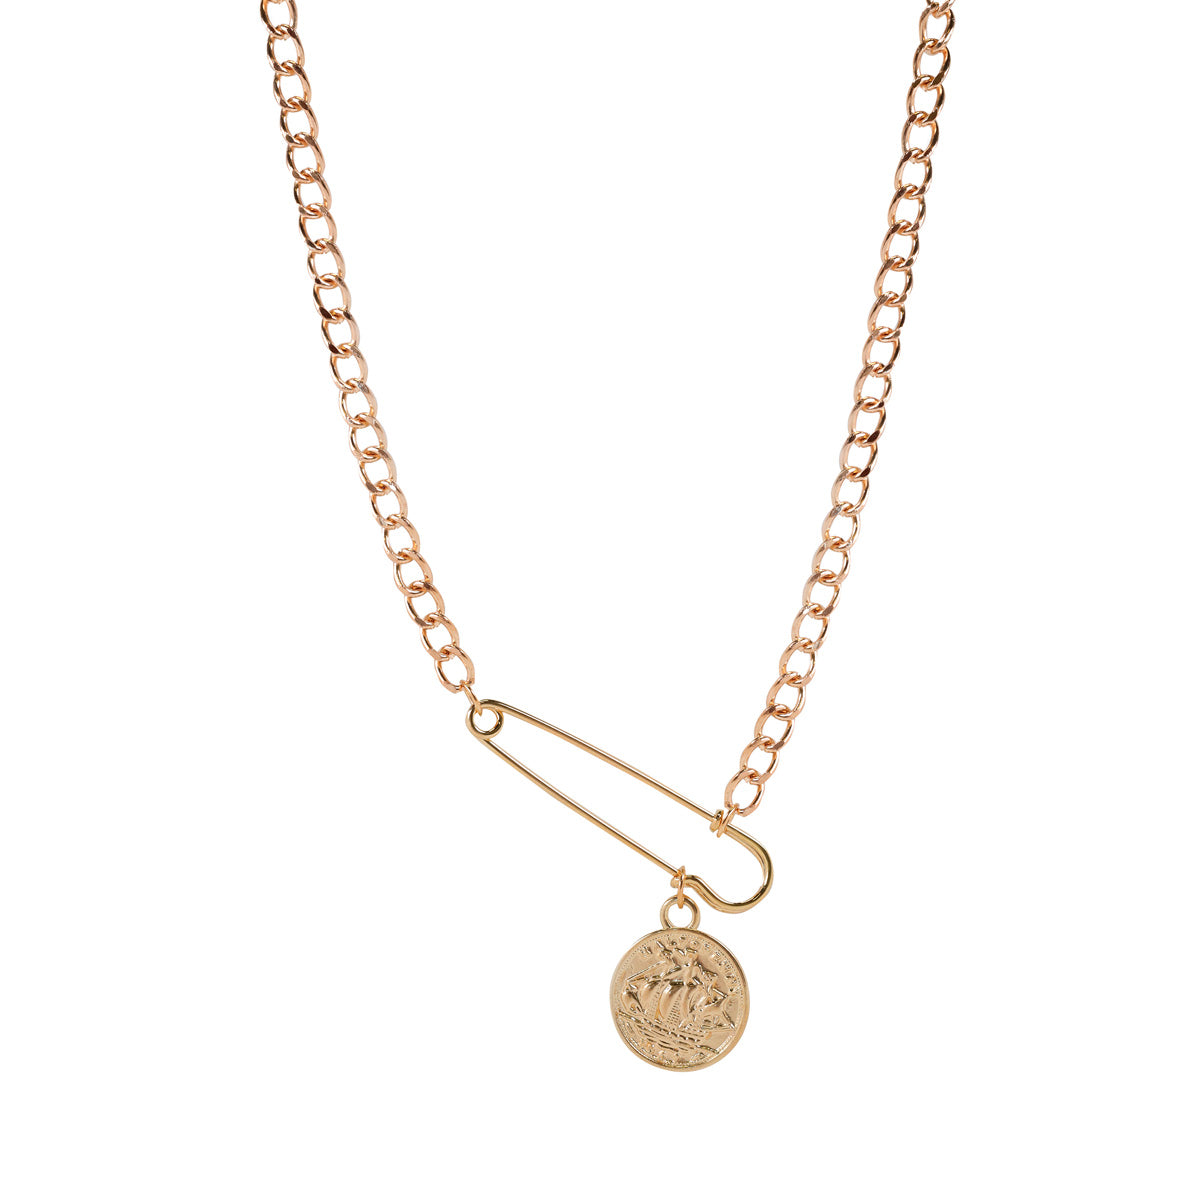 Hook and coin necklace